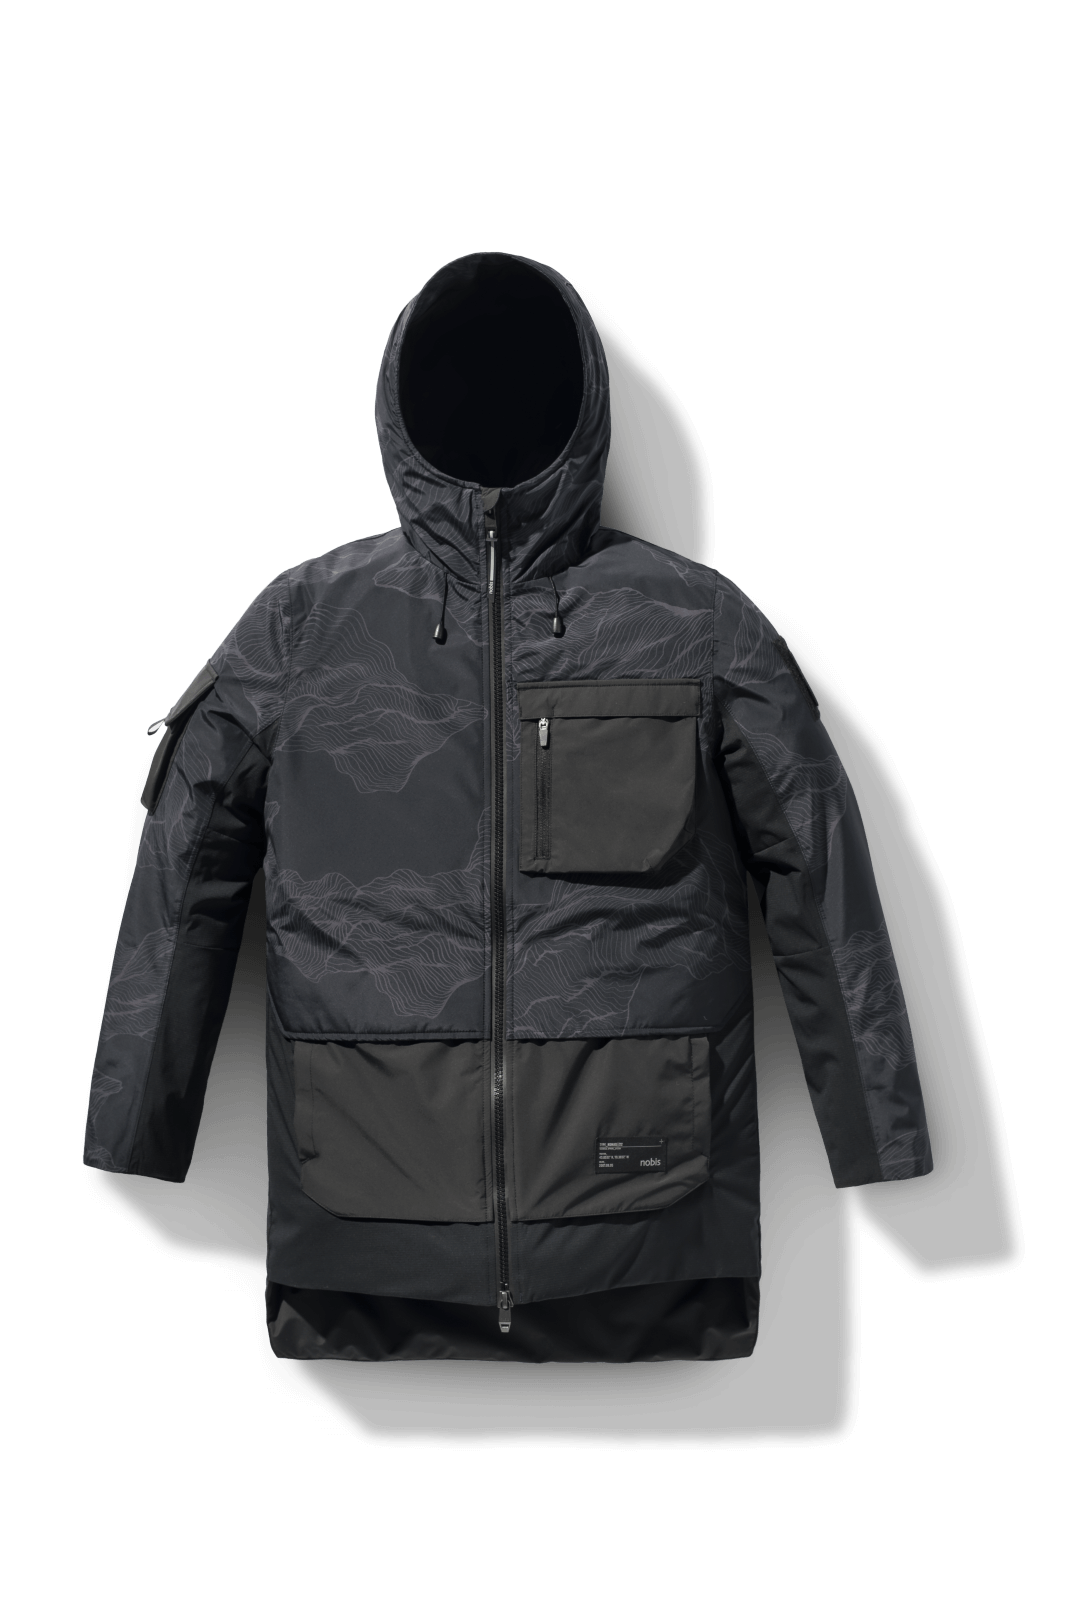 Alta Men's Performance Shell Jacket in hip length, Primaloft Gold Insulation Active+, chest and waist pockets, ventilation under arms, reflective detailing on hood and back, two-way front zipper, and non-removable hood with adjustable drawstrings, in Dark Desert